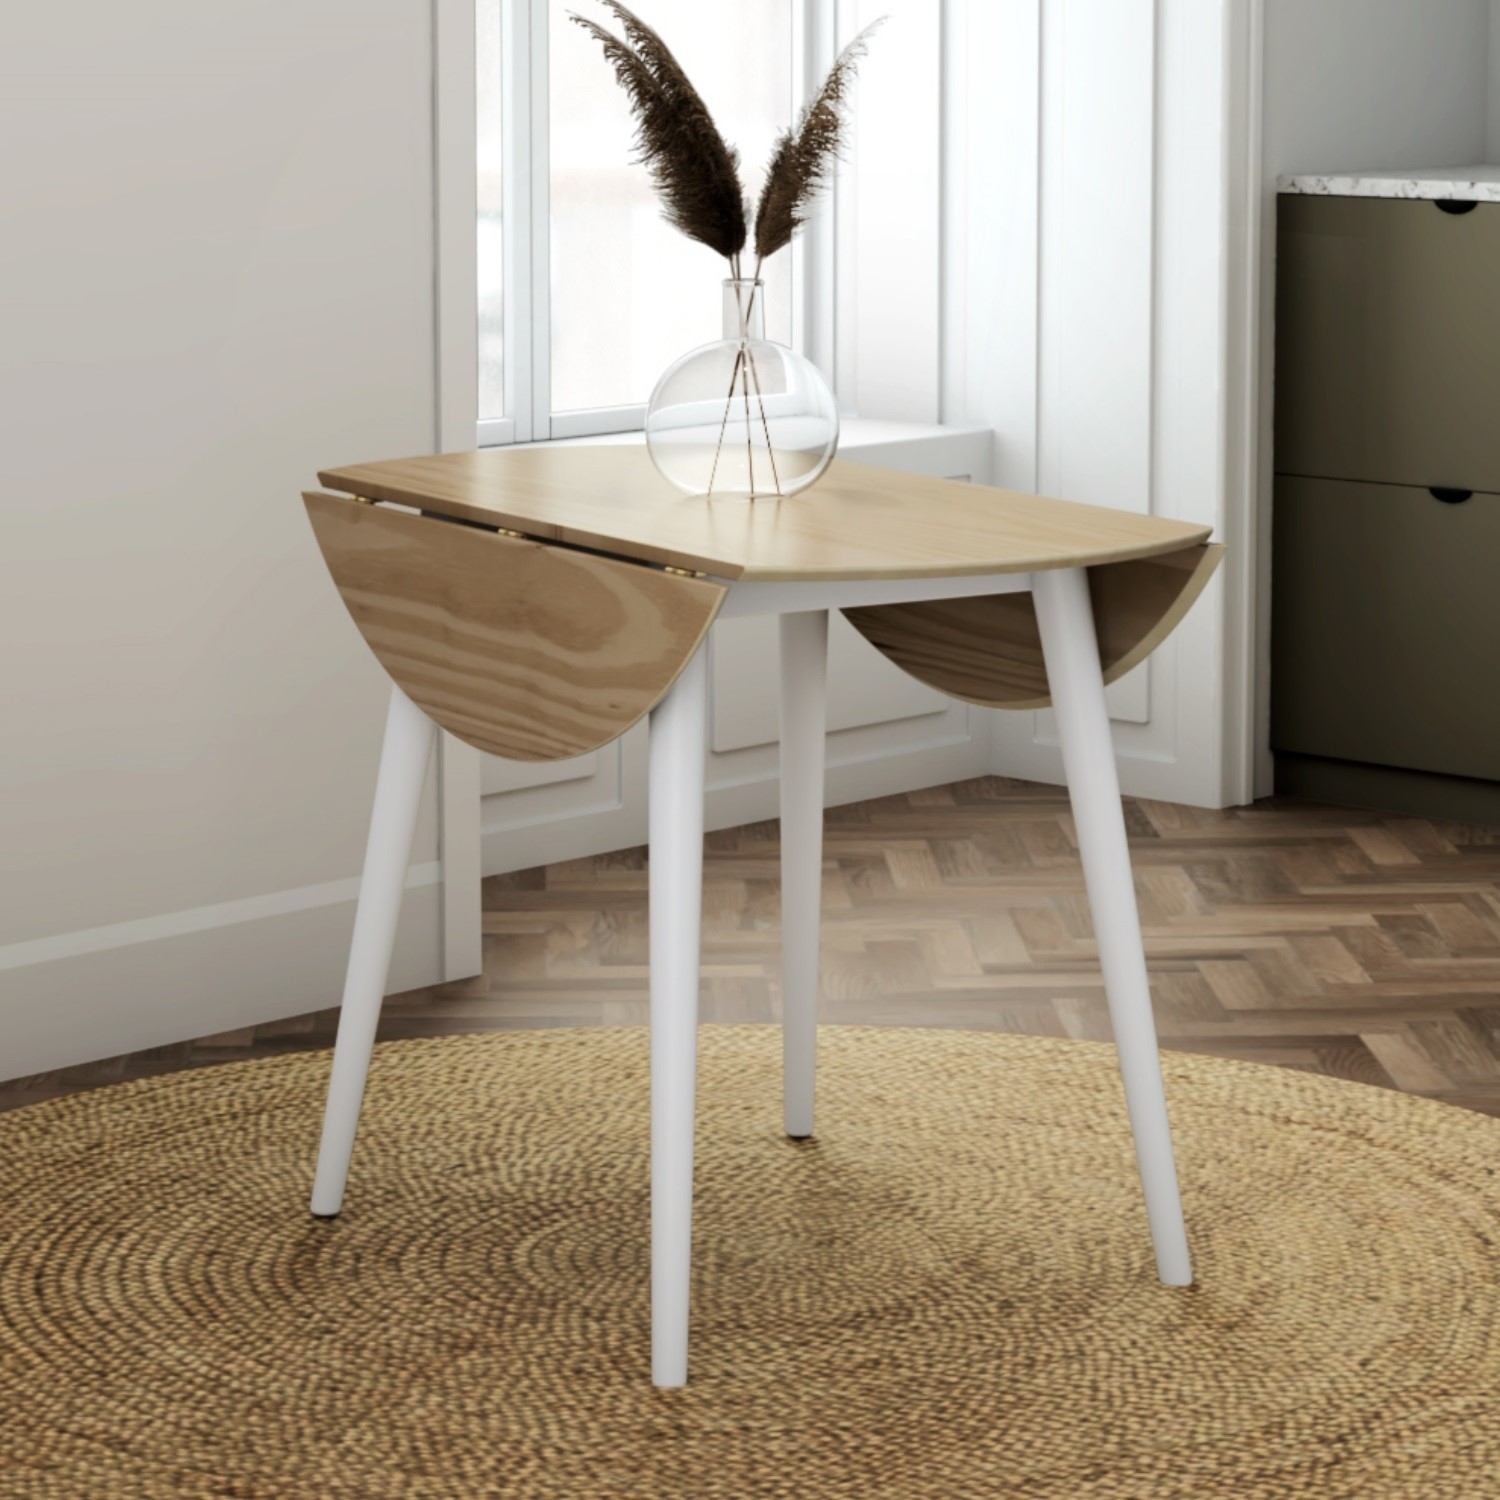 Round Drop Leaf Oak and White Dining Table - Seats 4 - Ola